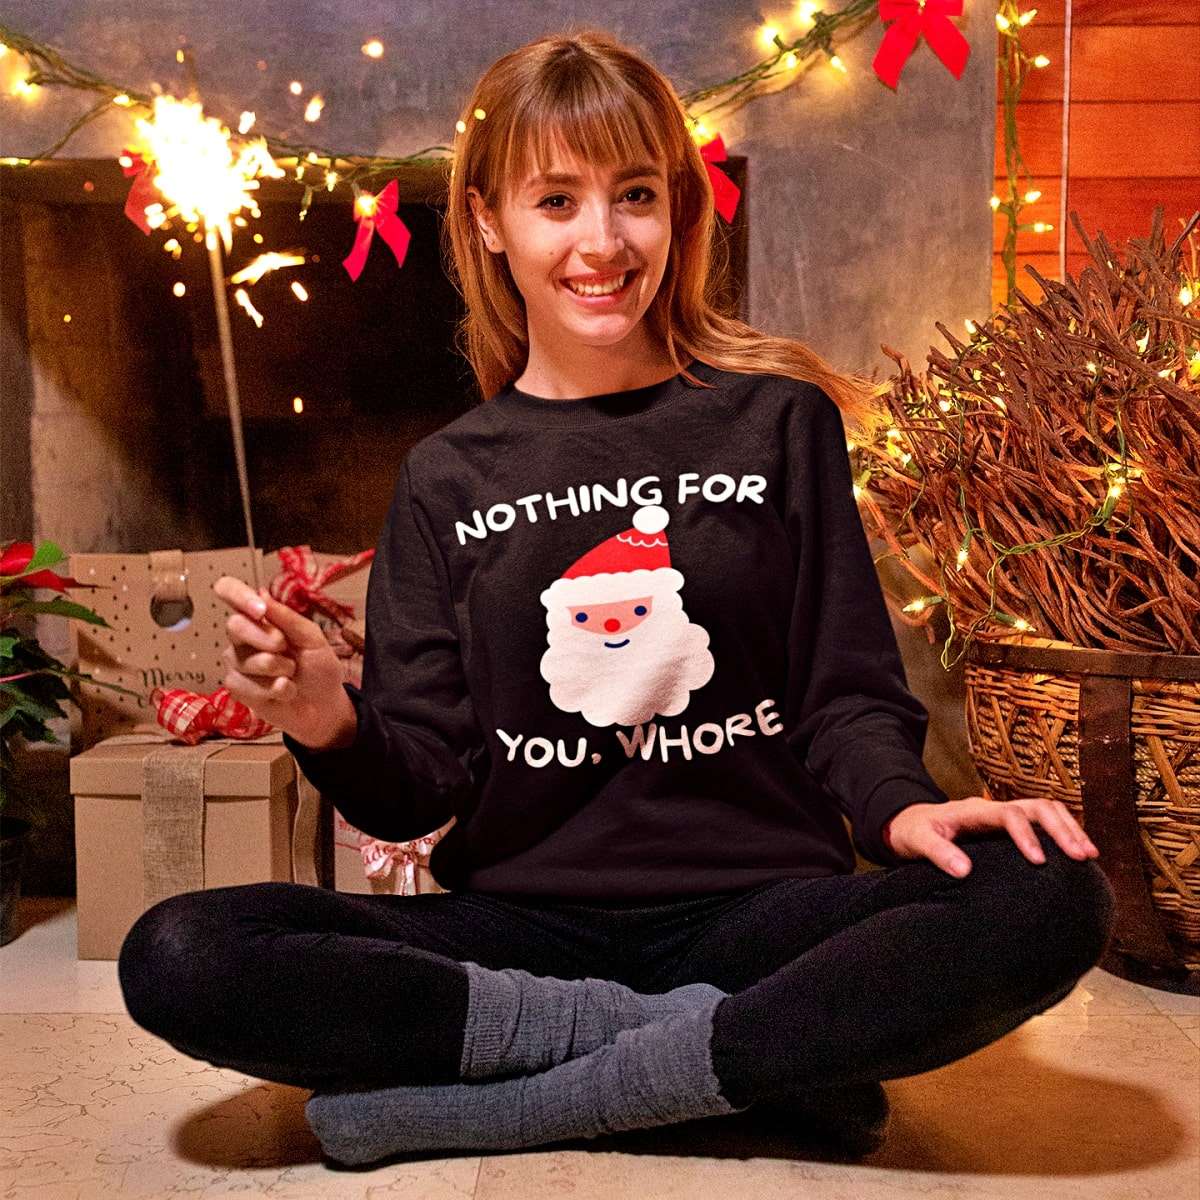 Nothing For You, Whore Funny Christmas Sweater, black - Santaland